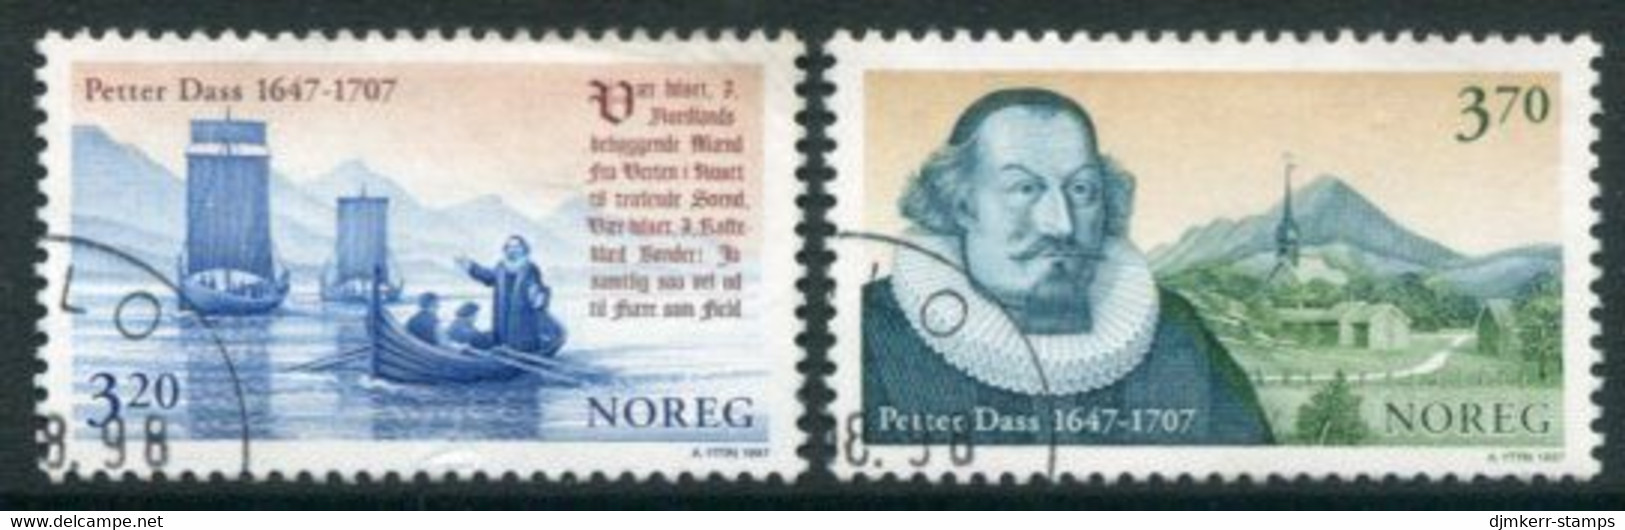 NORWAY 1997 Petter Dass Birth Anniversary Used.   Michel 1267-68 - Used Stamps